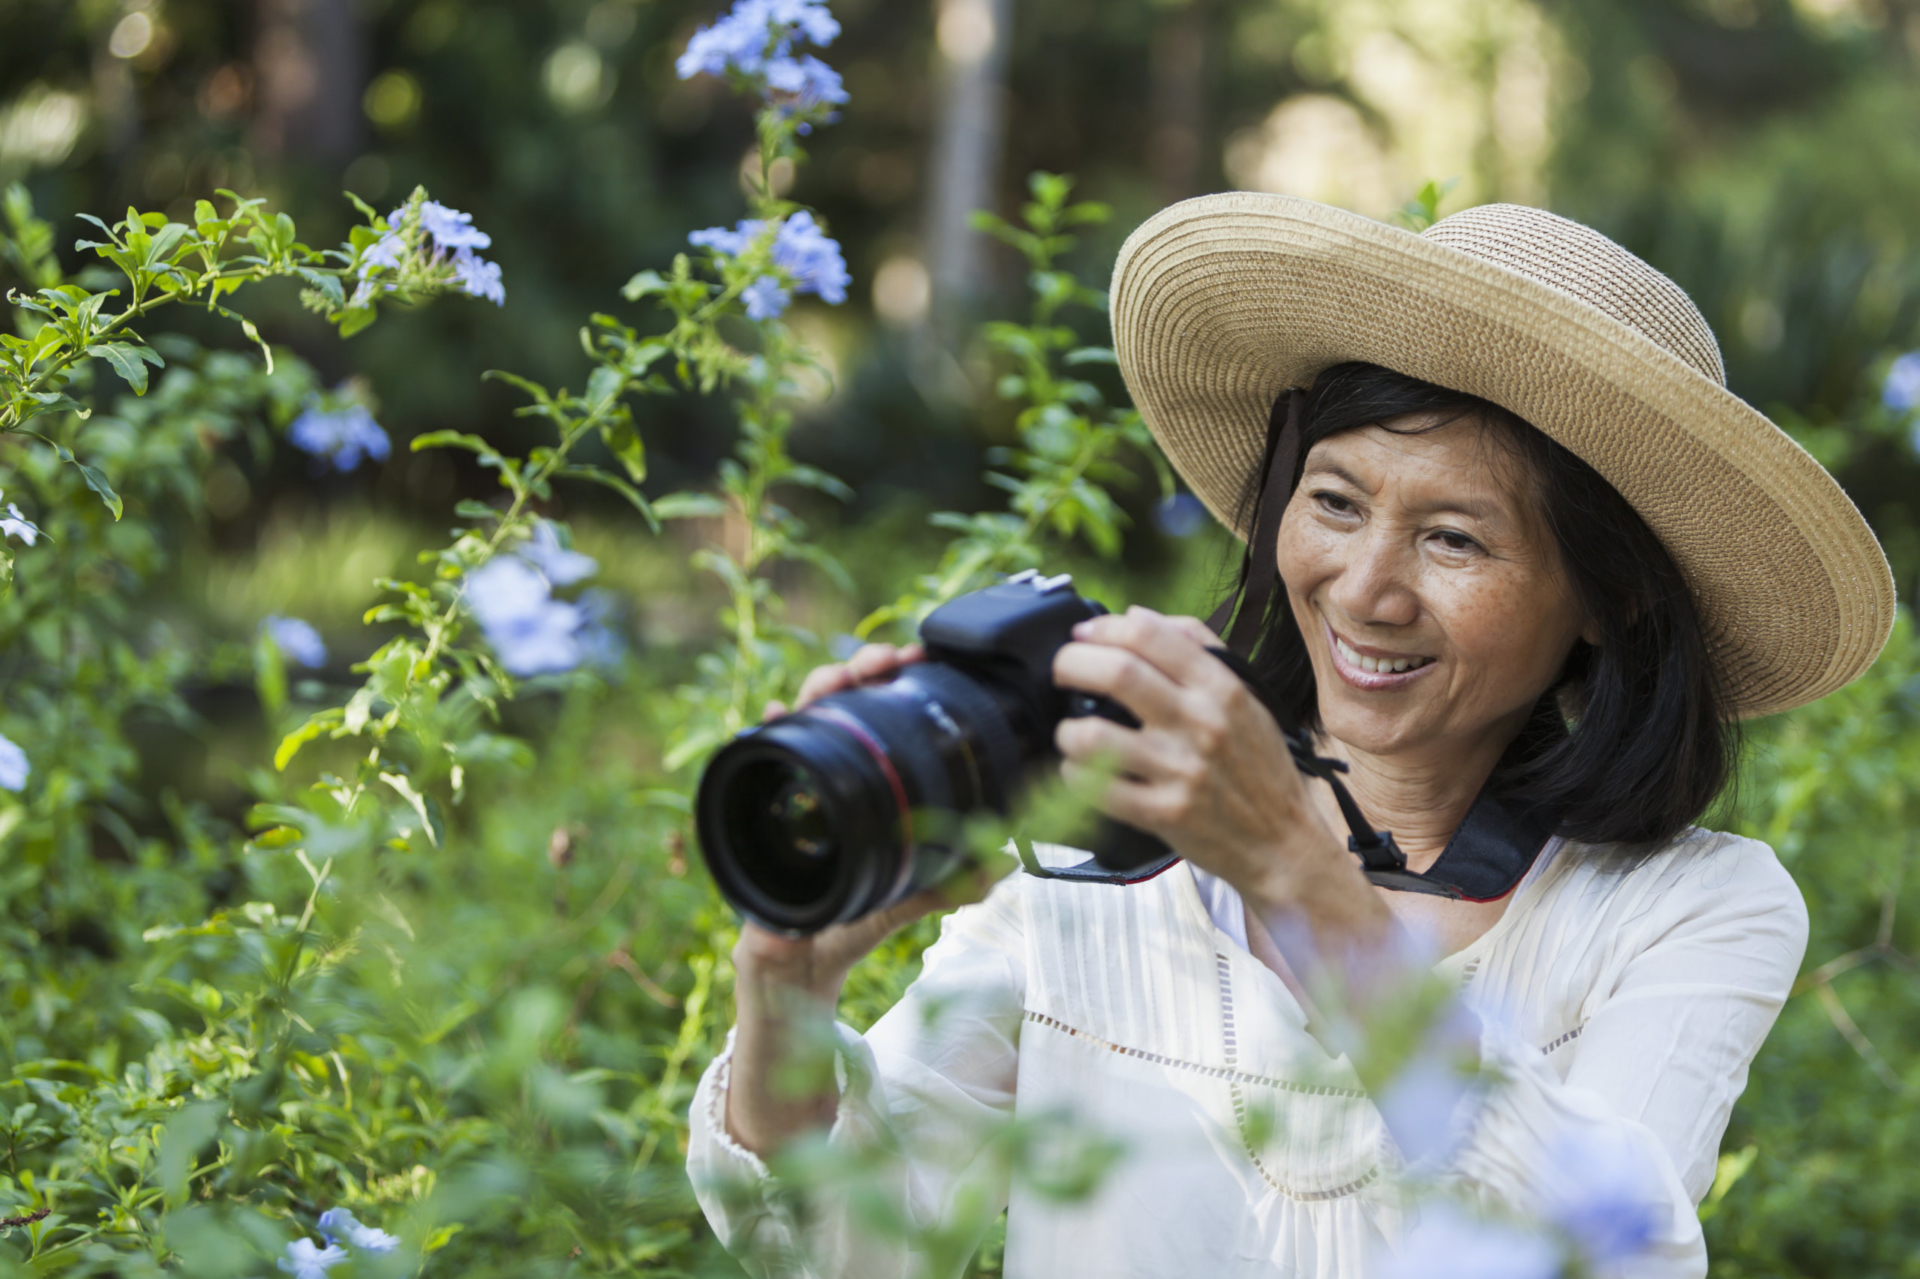 Woman taking photos of flowers outside